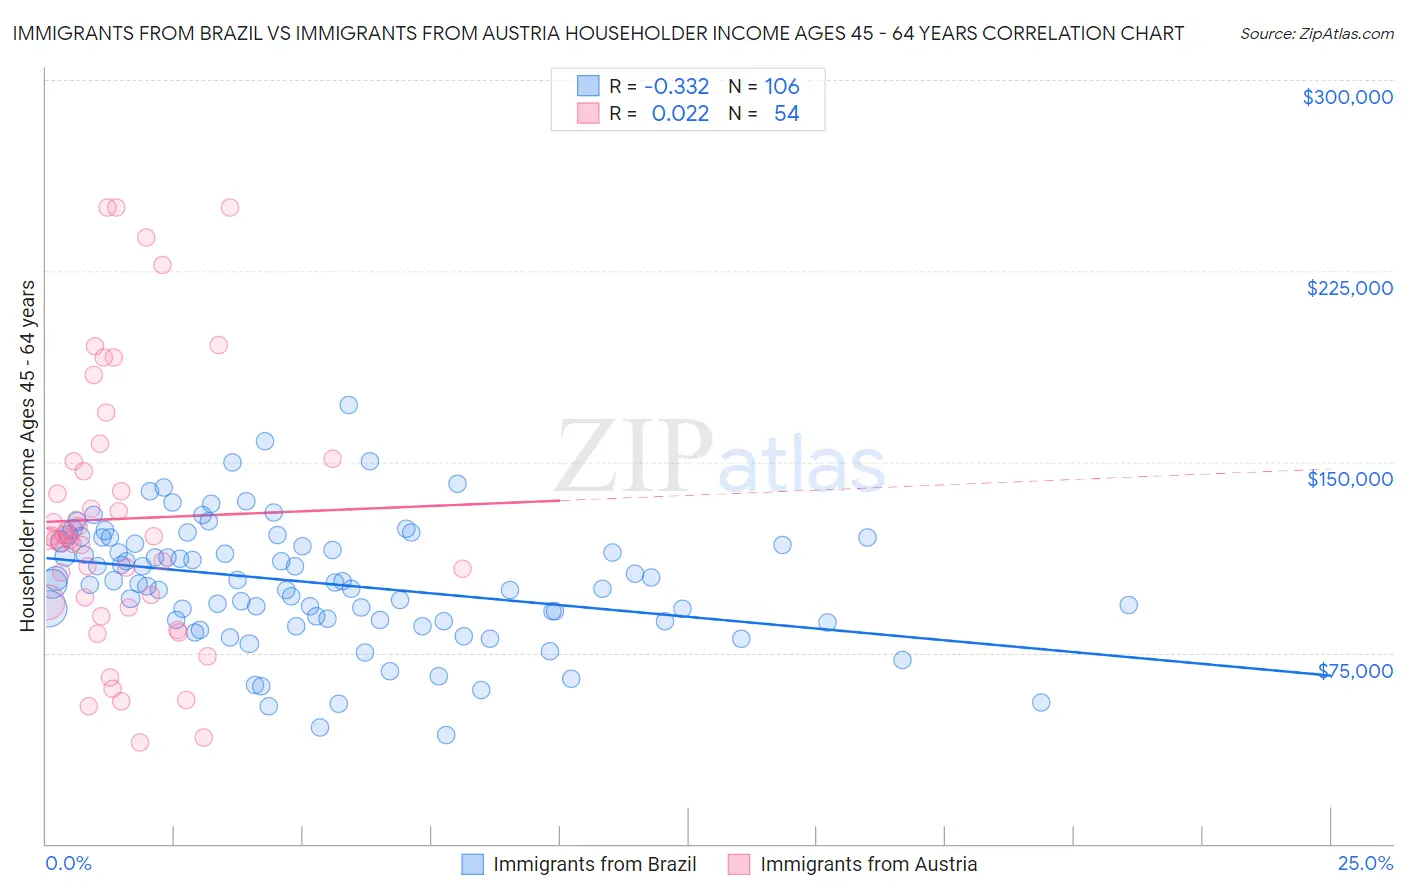 Immigrants from Brazil vs Immigrants from Austria Householder Income Ages 45 - 64 years